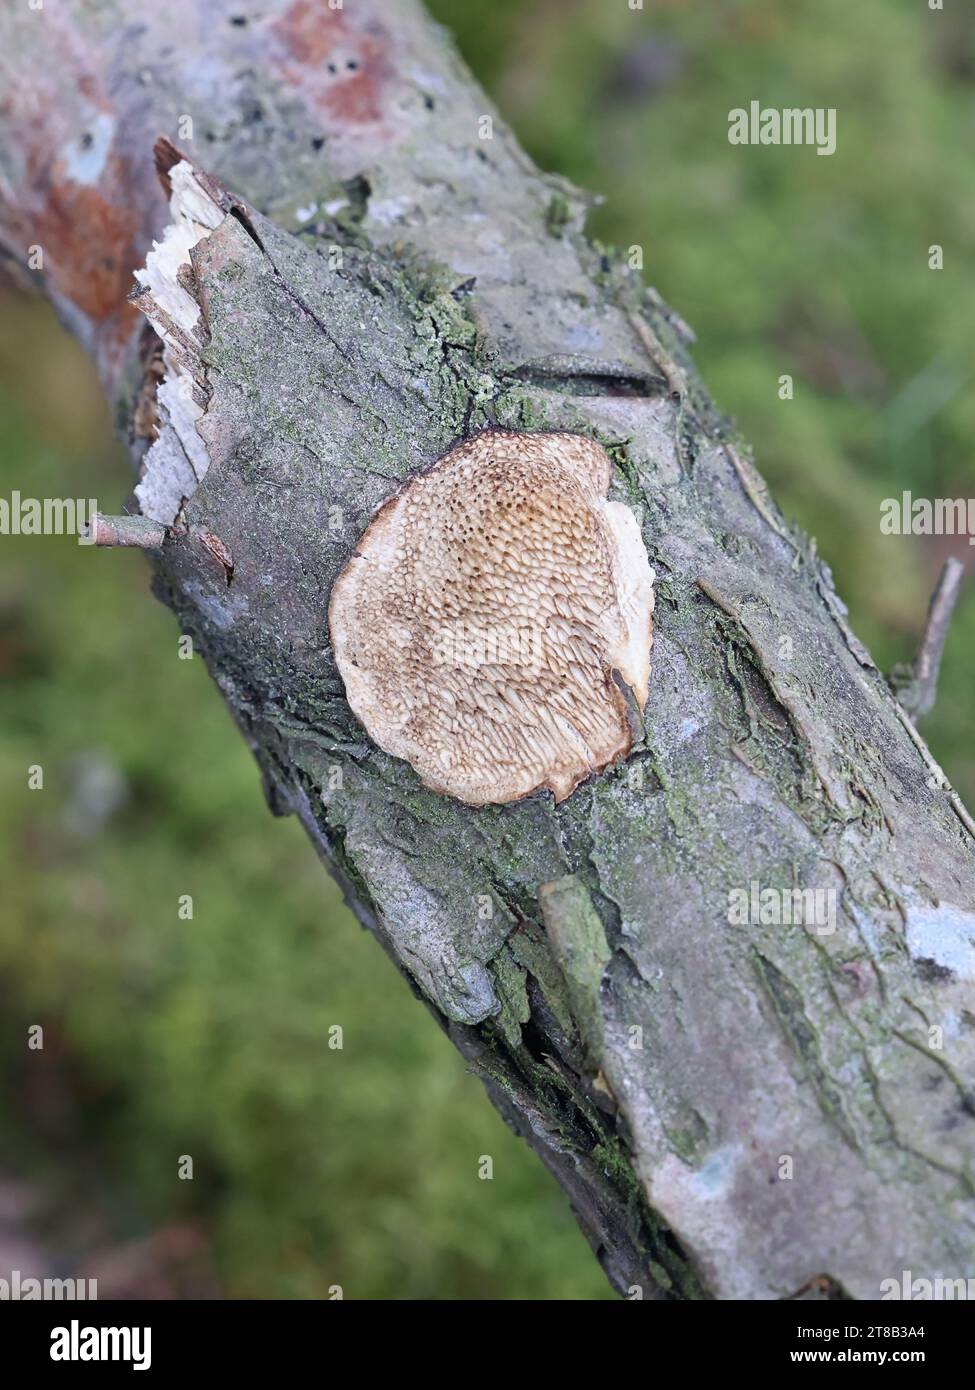 Dichomitus campestris, also called Polyporus campestris, commonly known as Hazel porecrust, wild bracket fungus from Finland Stock Photo